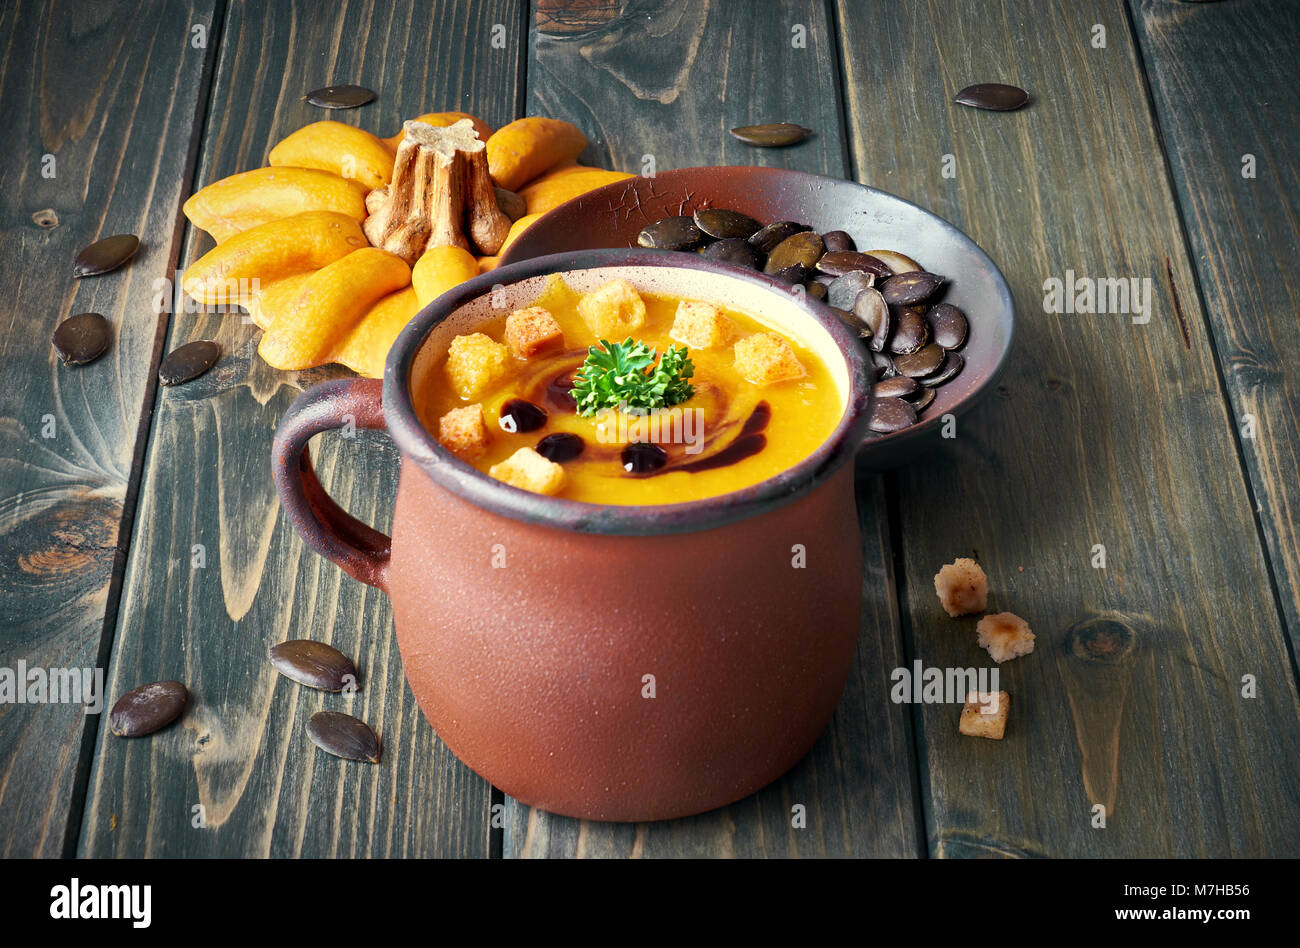 Tasty pumpkin soup in old enamel mug on rustic wooden table. The soup is served with croutons, parsley and pumpkin oil. Stock Photo